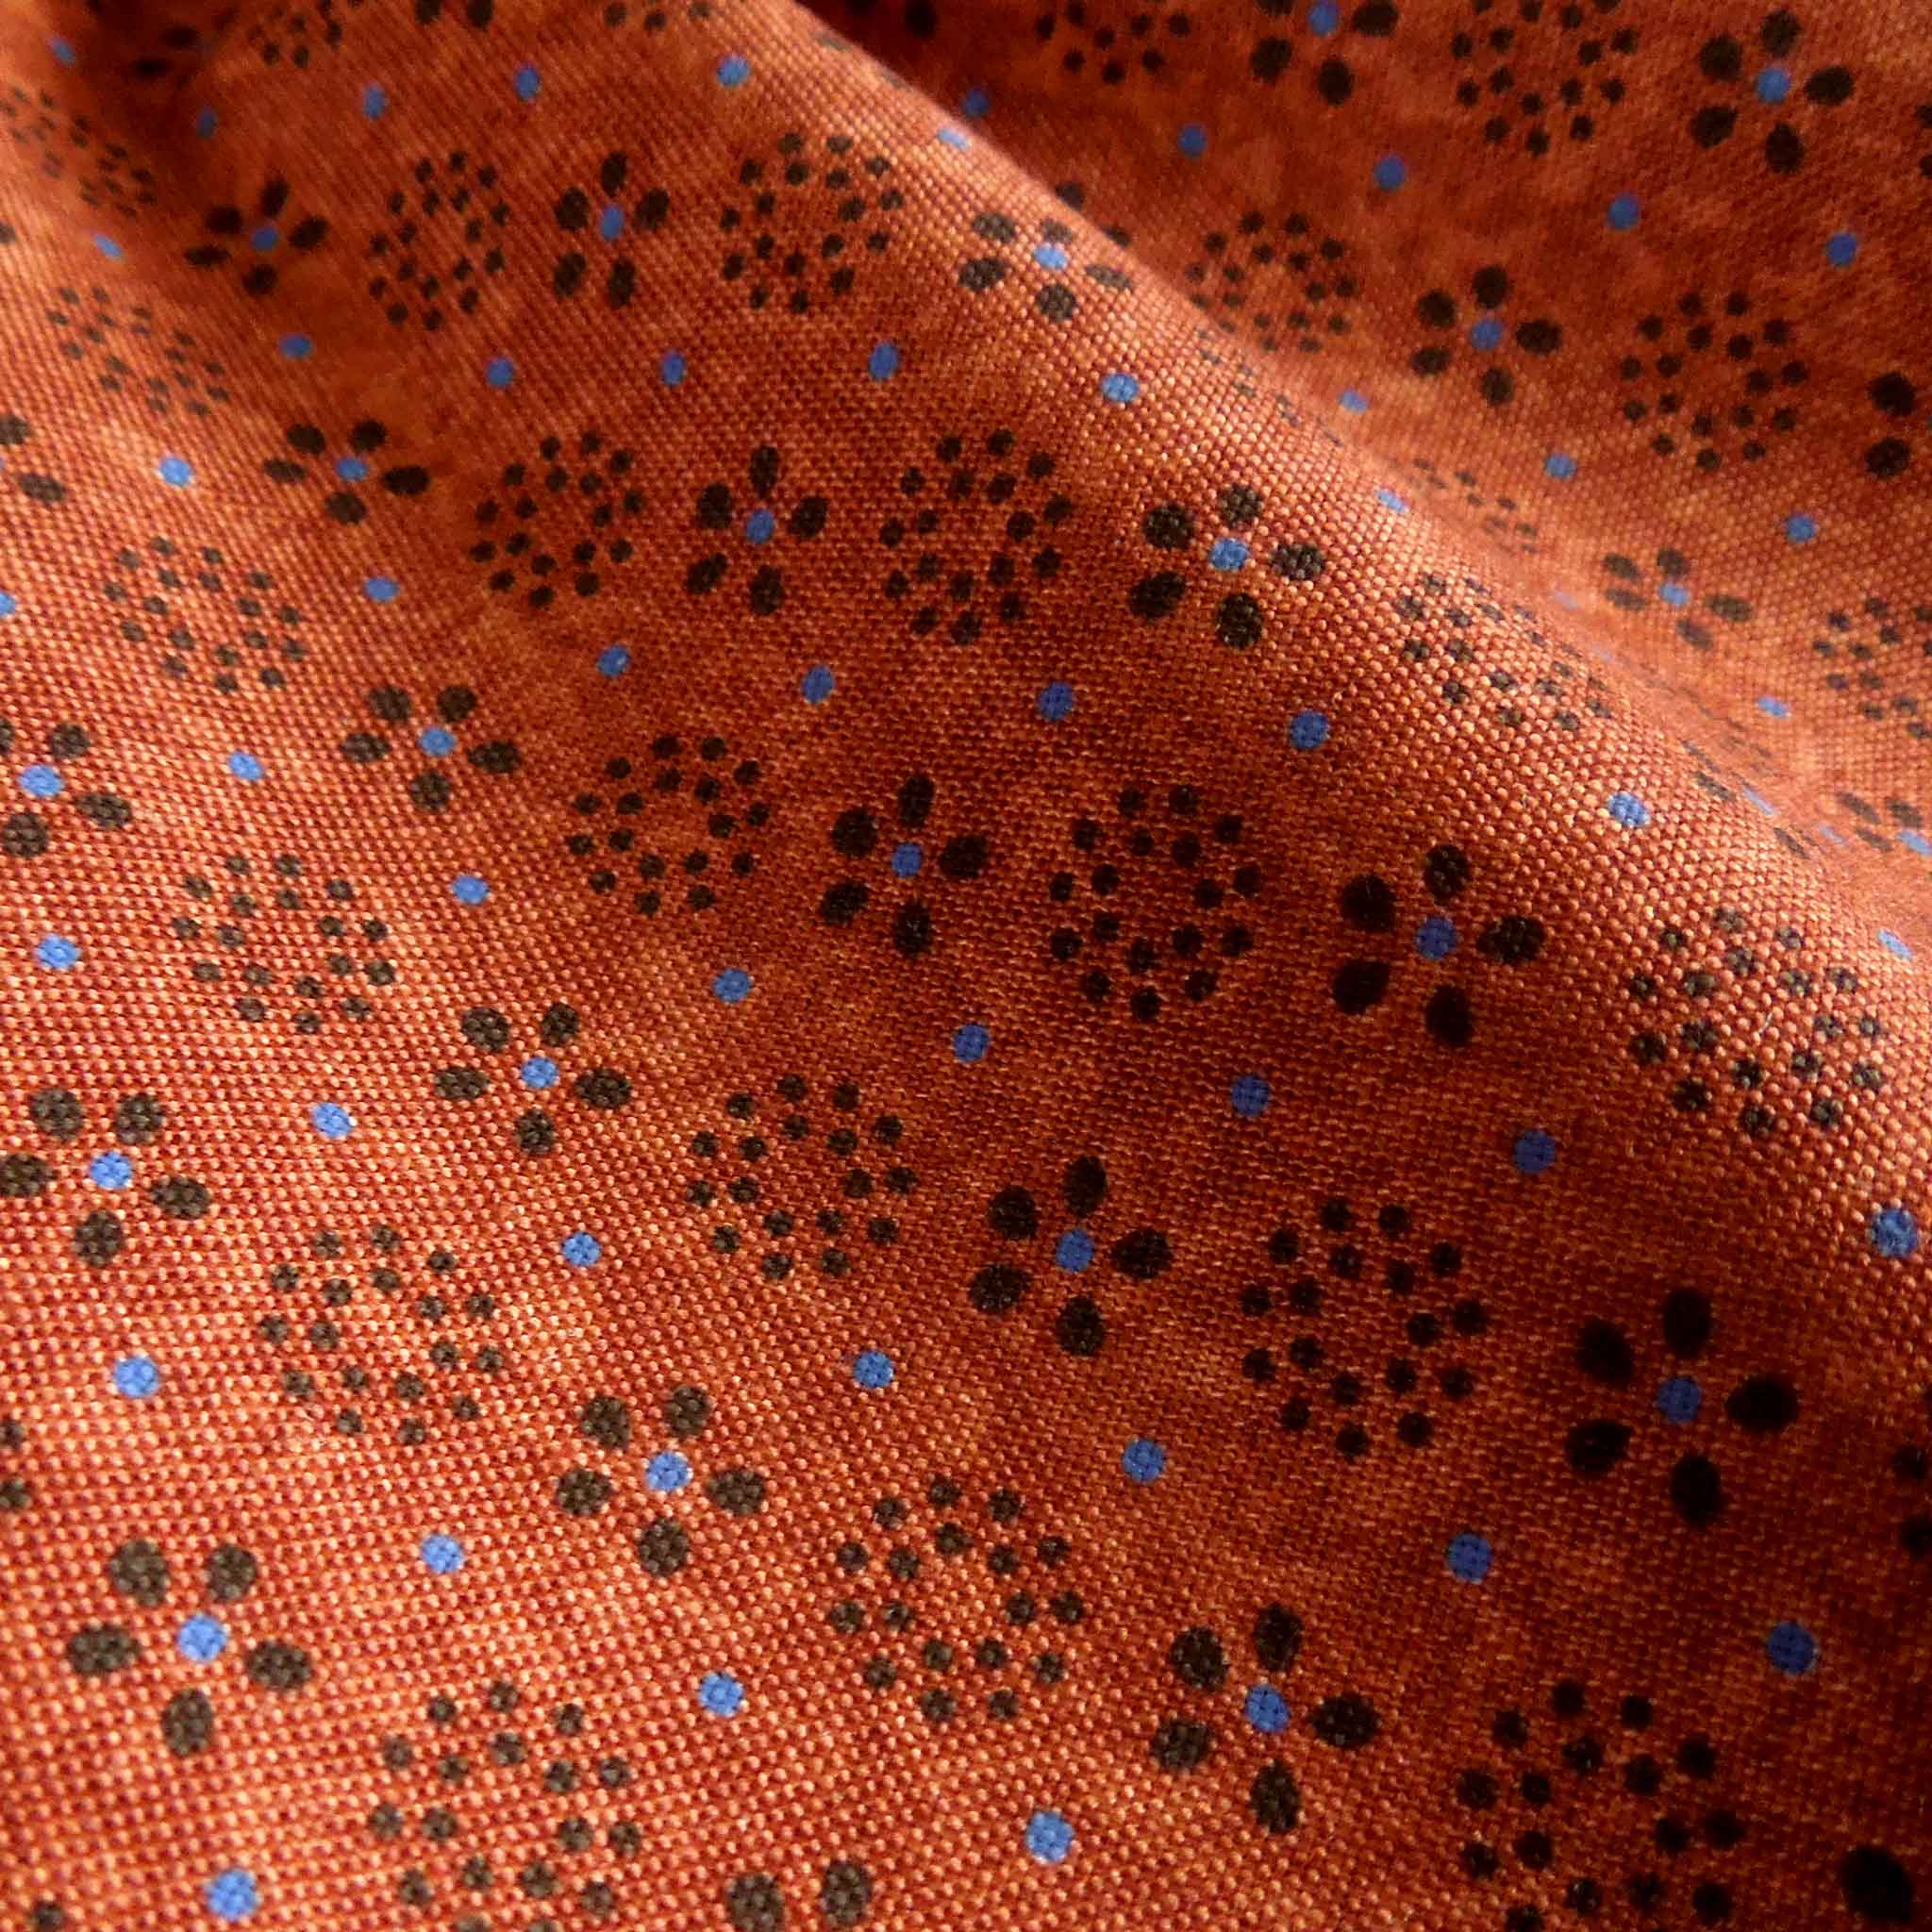 Rust Brown Mosaic Circles Fabric Buggy Barn Bloomers - Henry Glass 1191